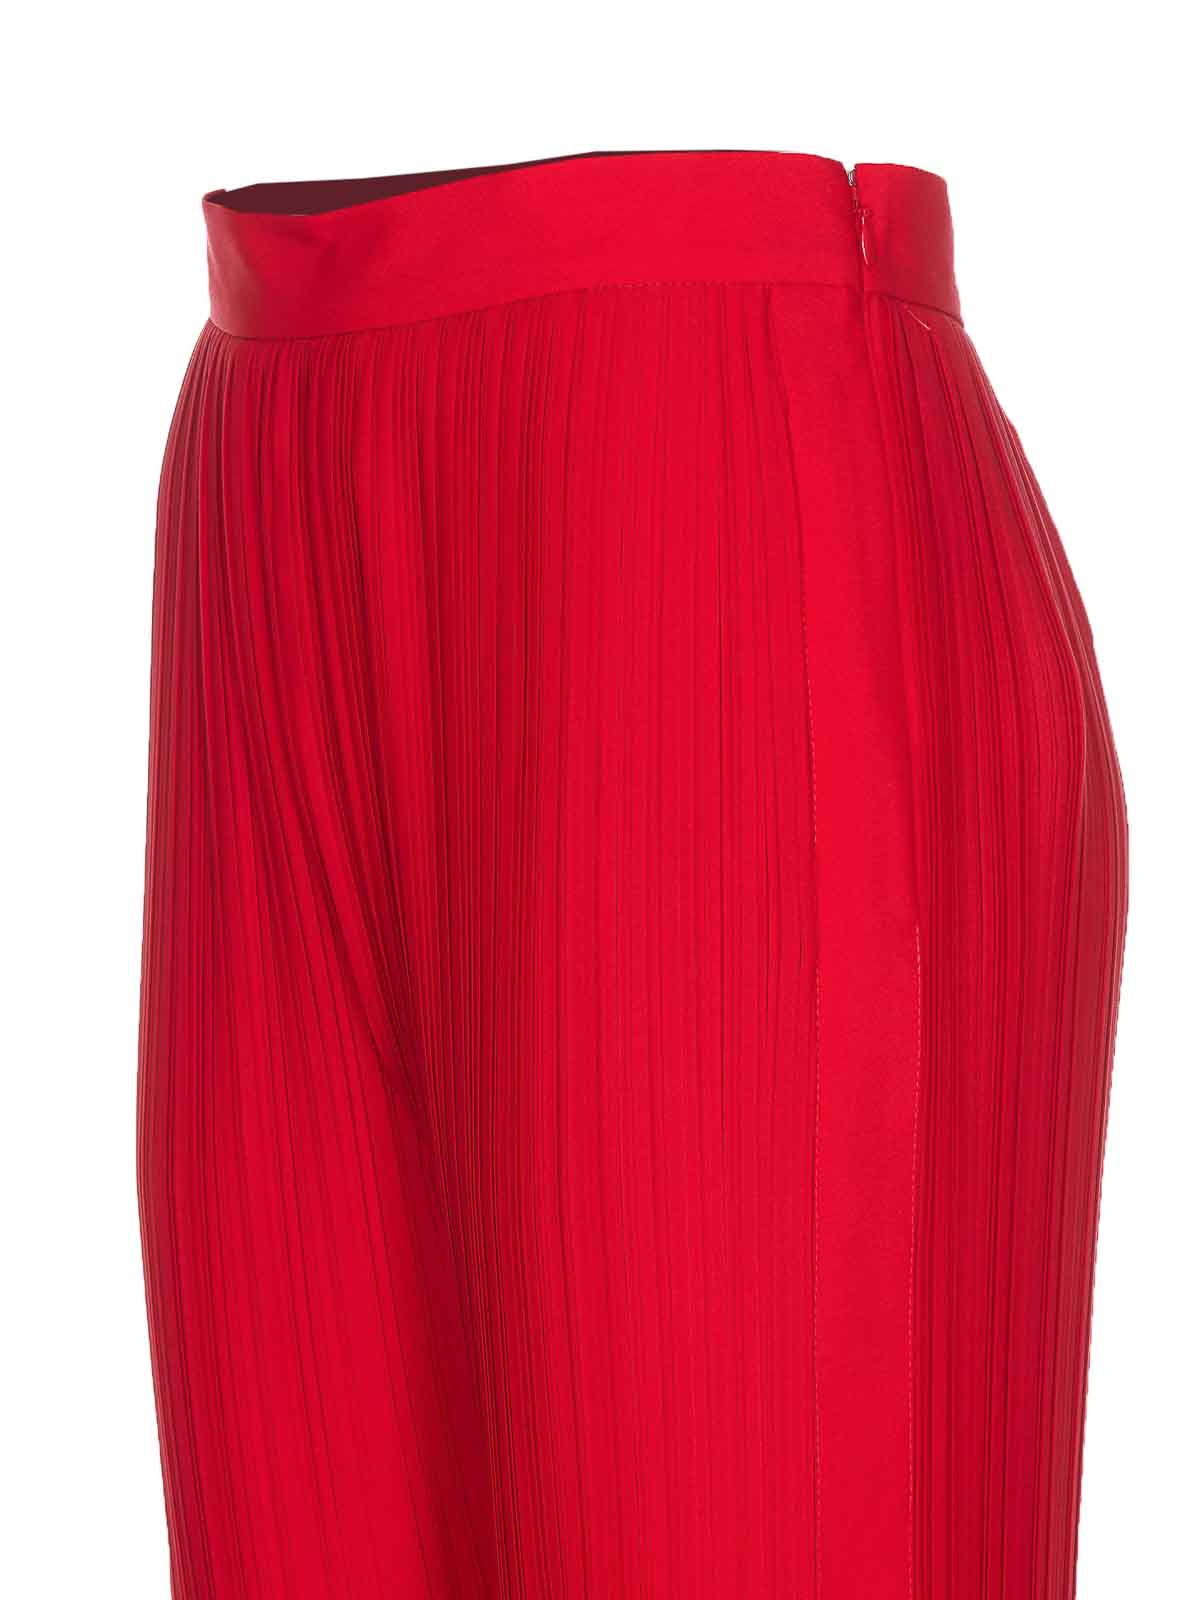 Shop Lanvin Red Pleated Pants Lateral Zip